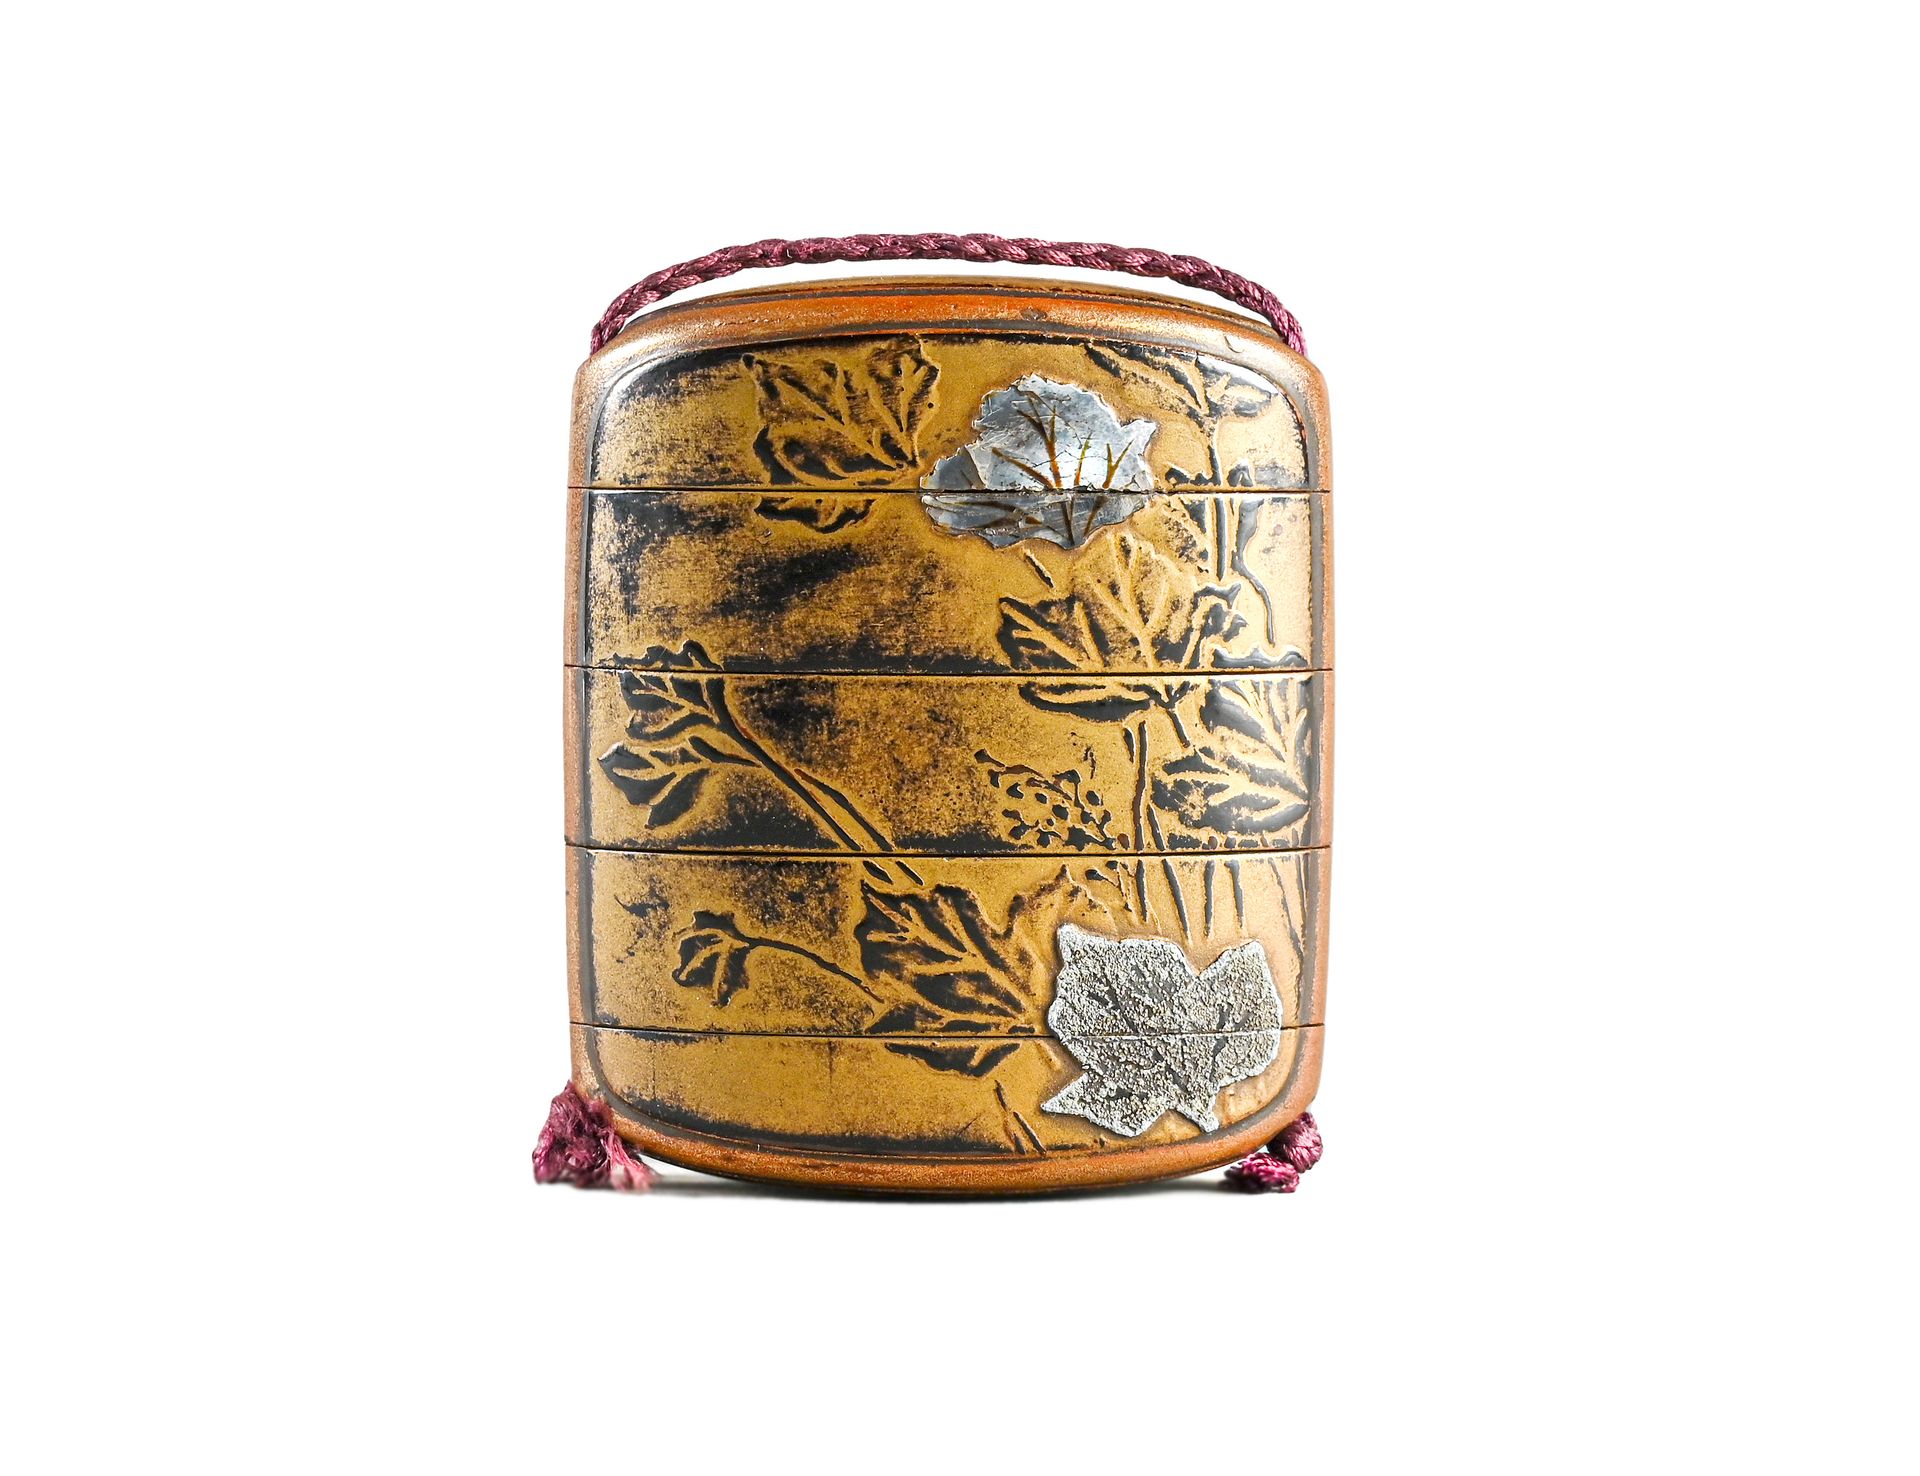 JAPON, début XVIIIe siècle Inro with four compartments inlaid with mother-of-pea&hellip;